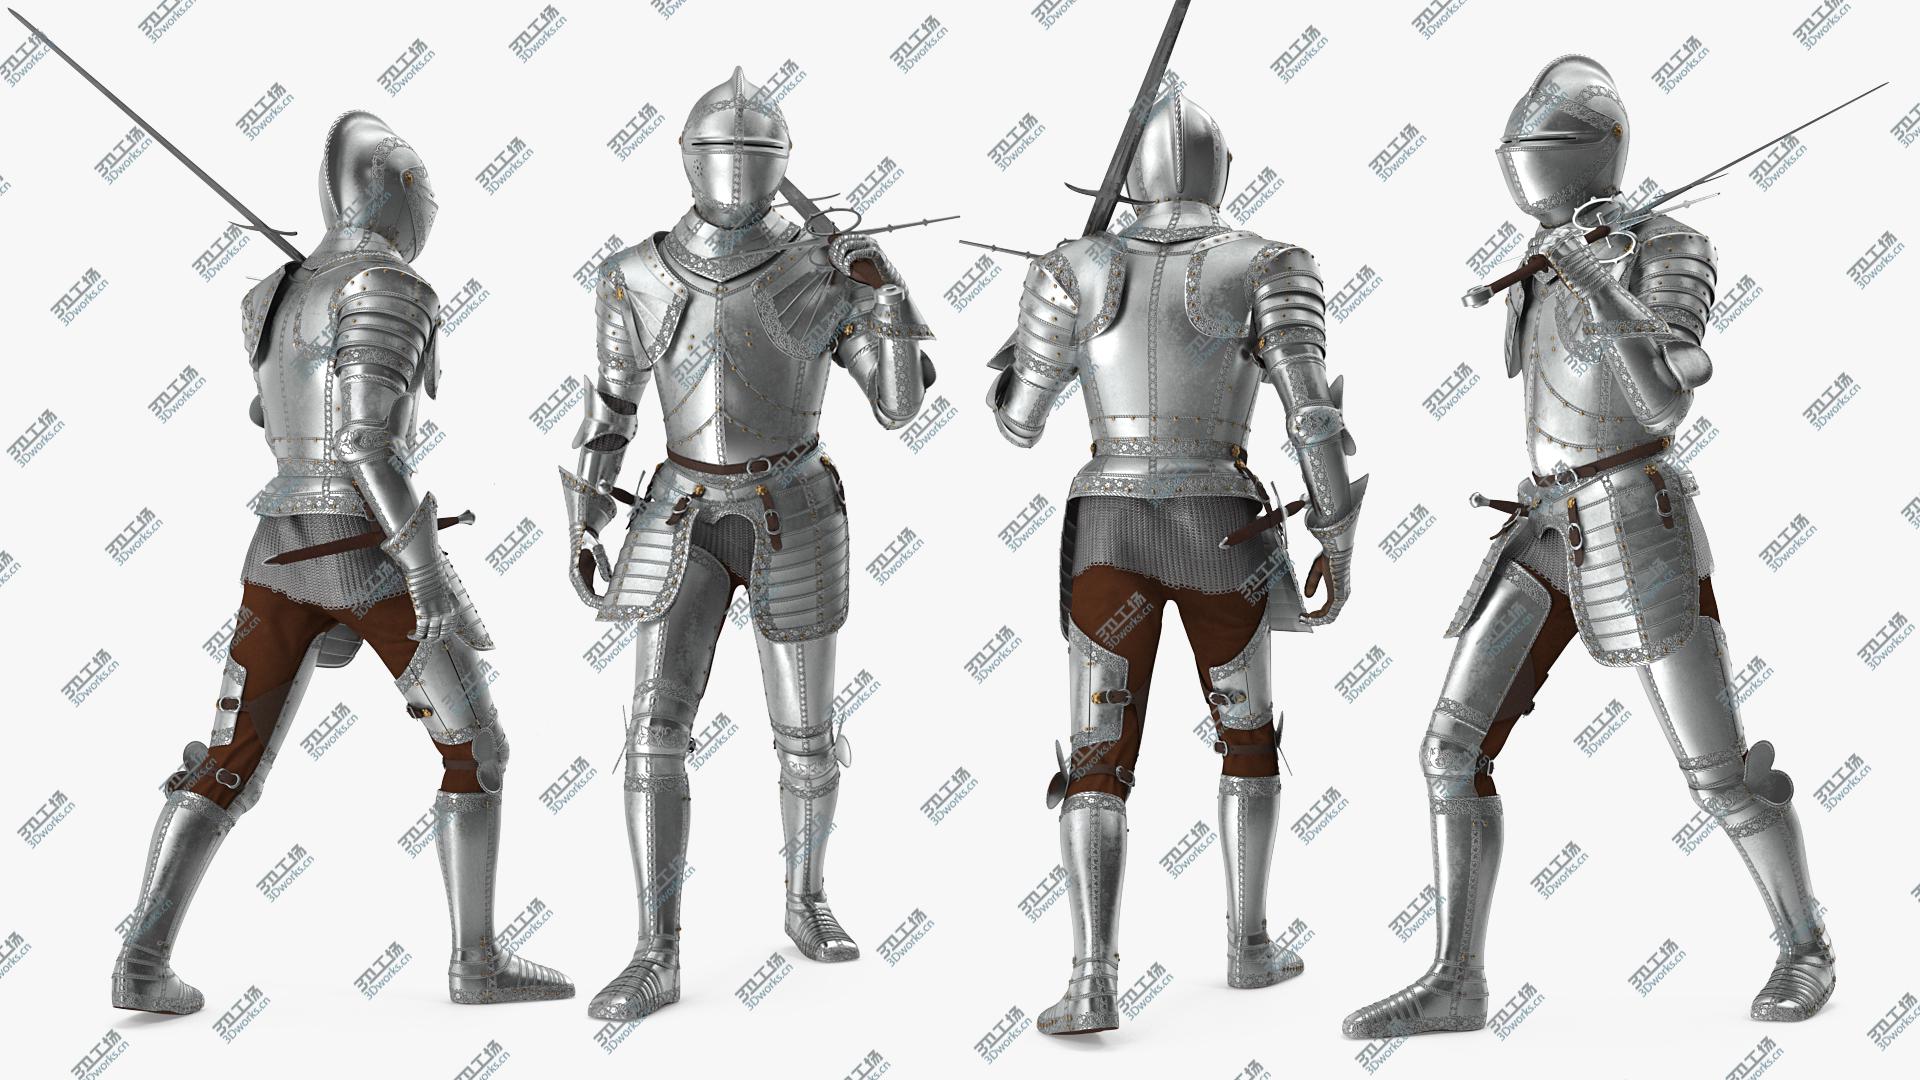 images/goods_img/20210313/3D Polished Knight Plate Armor Walking Pose/2.jpg